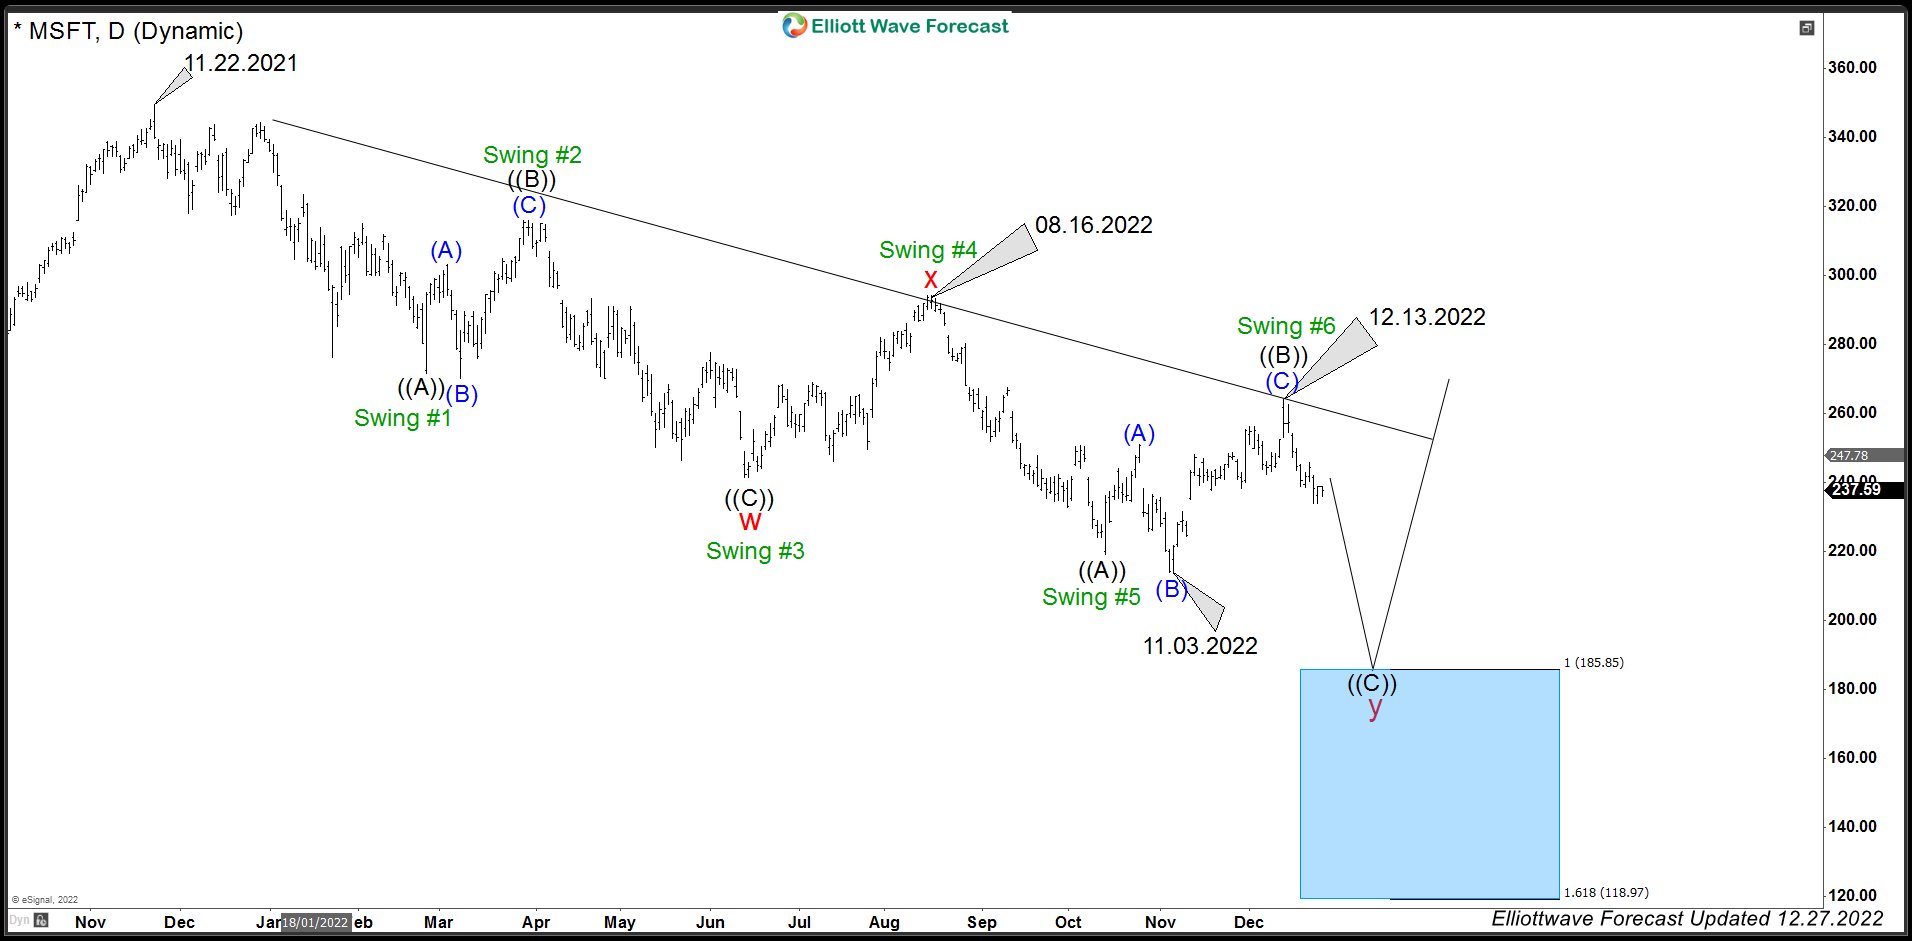 Microsoft Elliott Wave Sequence Favors Extension Lower